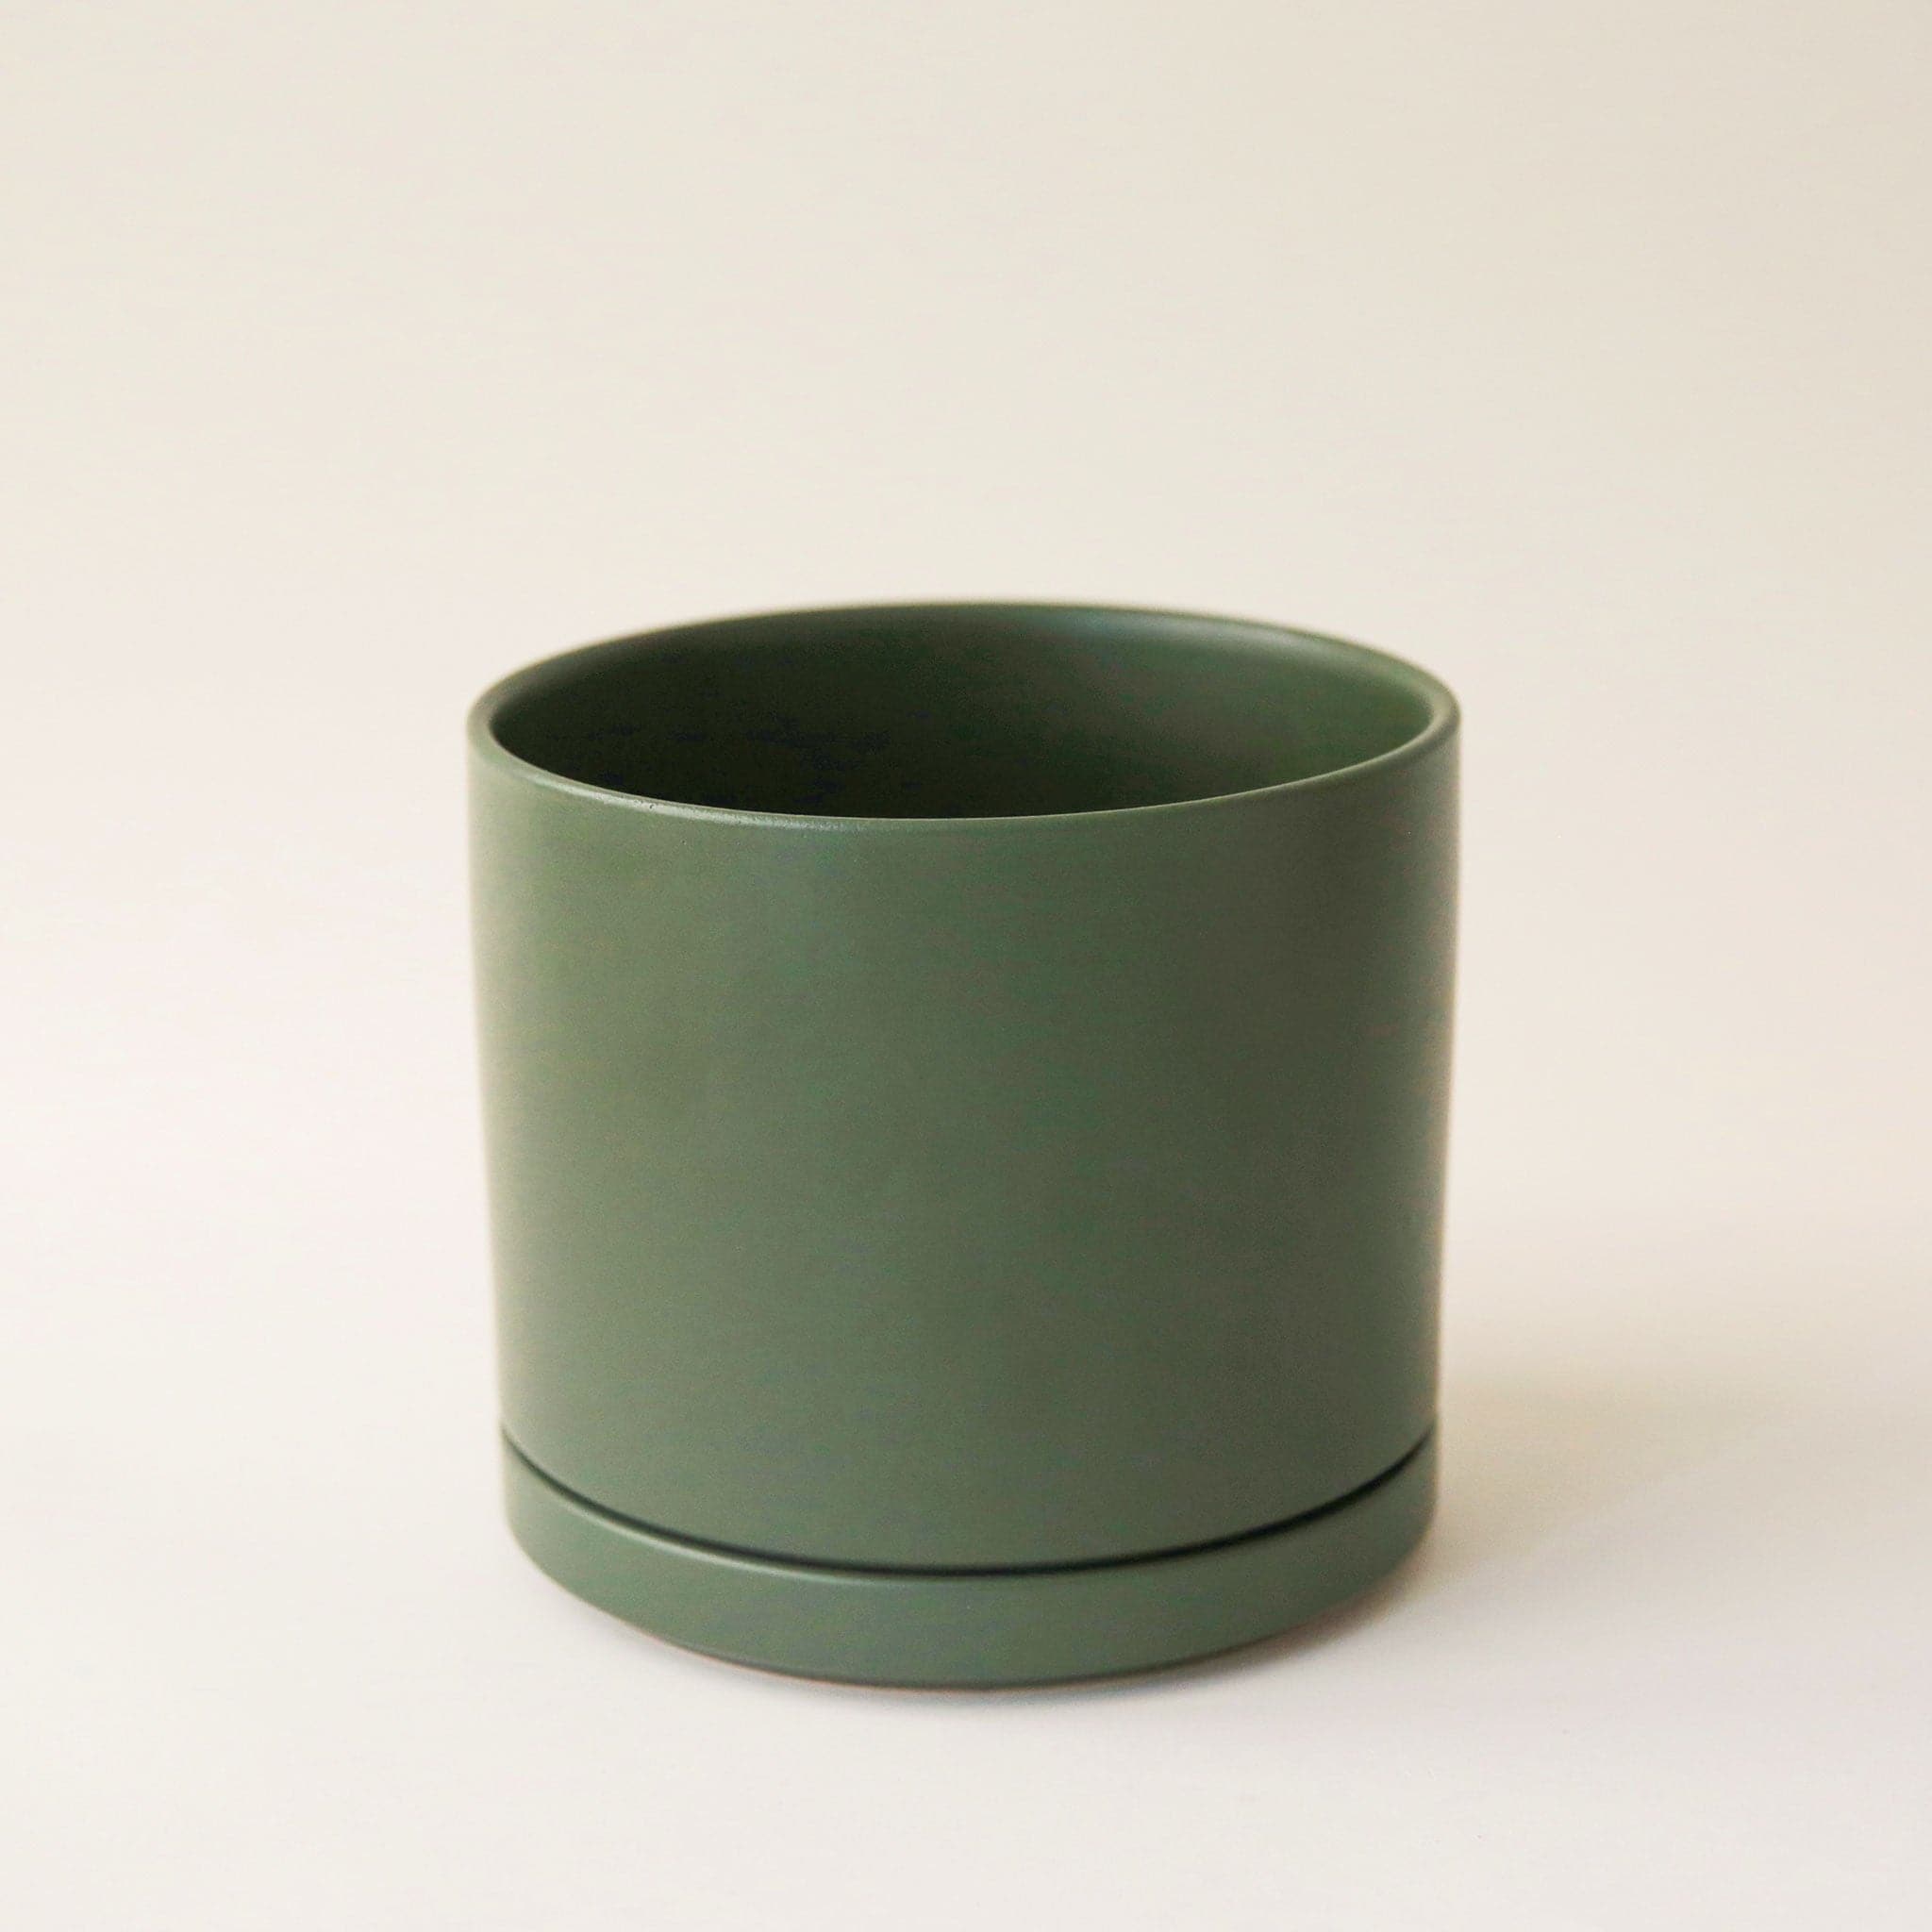 A green ceramic planter with a removable saucer filled with a house plant.